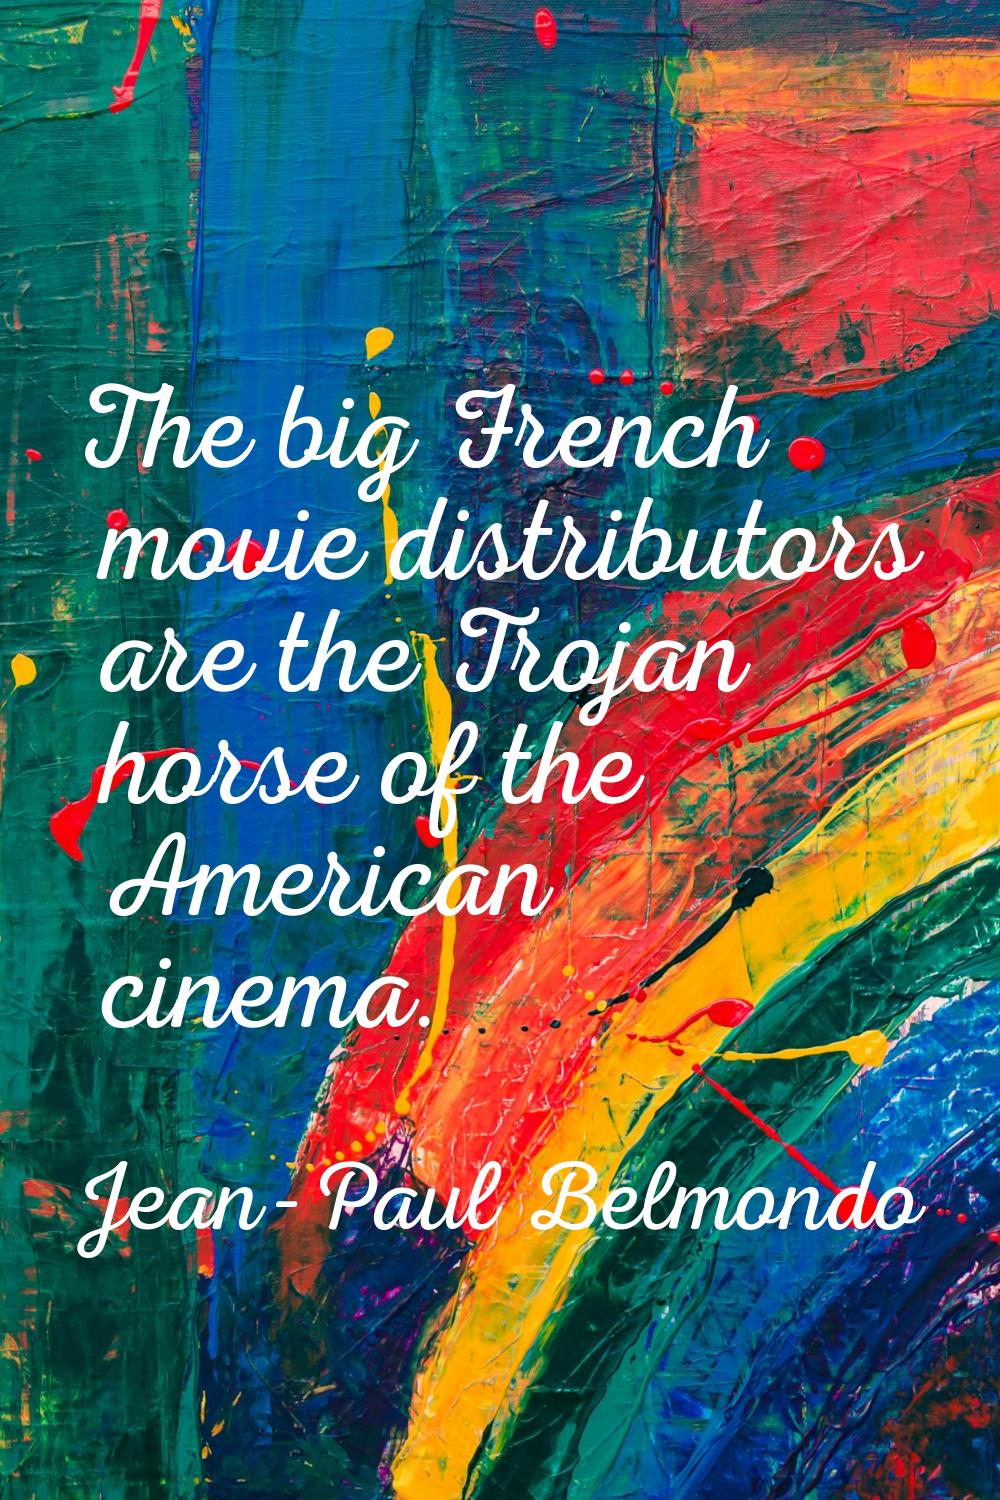 The big French movie distributors are the Trojan horse of the American cinema.